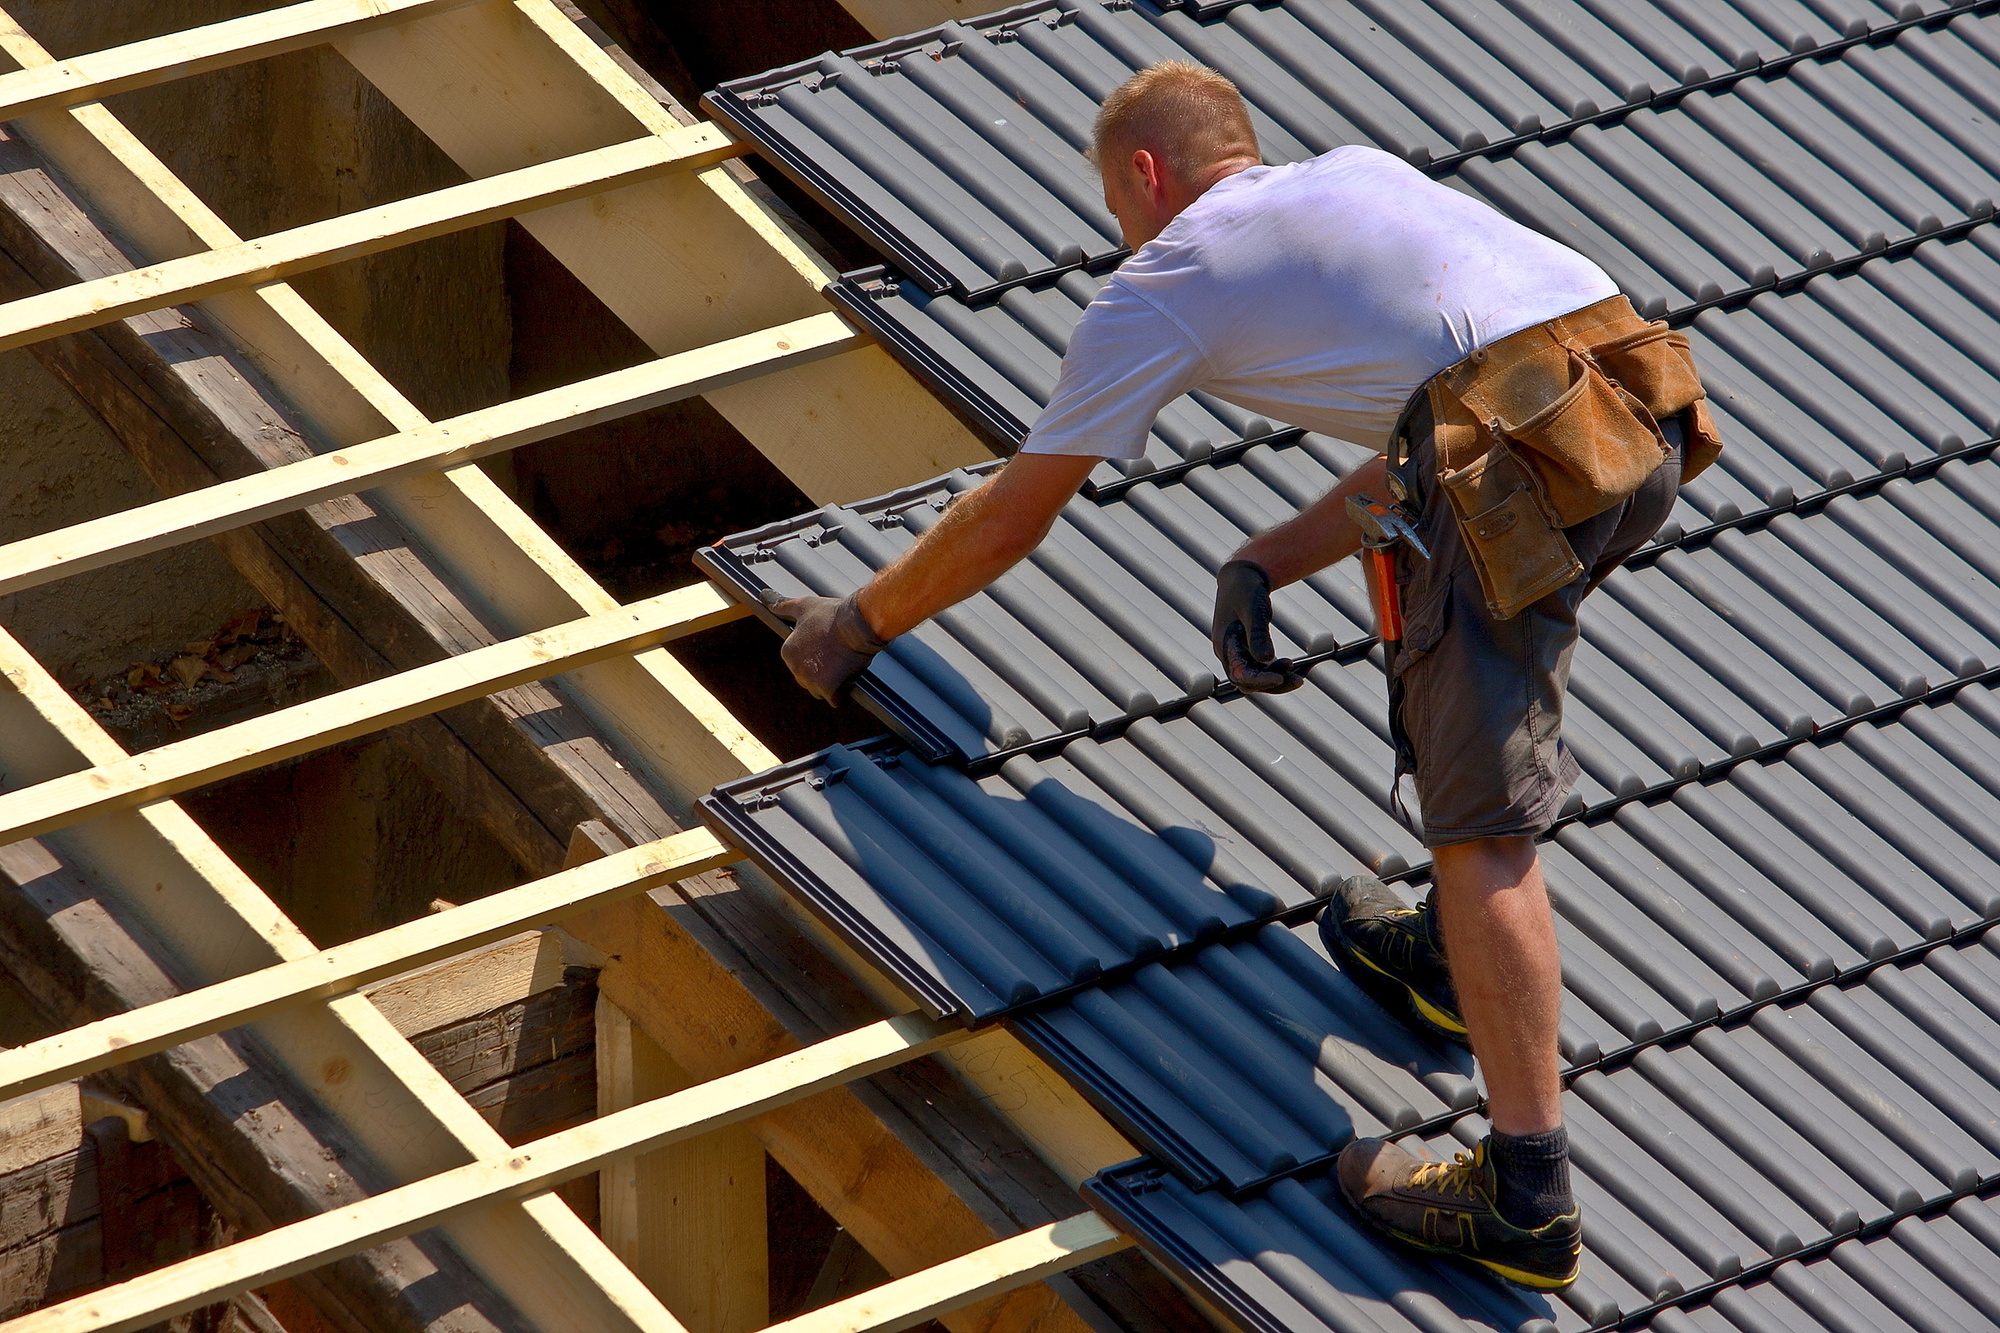 Debating whether to tackle your residential roofing project yourself or hire a professional? This guide breaks down the pros and cons of DIY vs. hiring a pro.